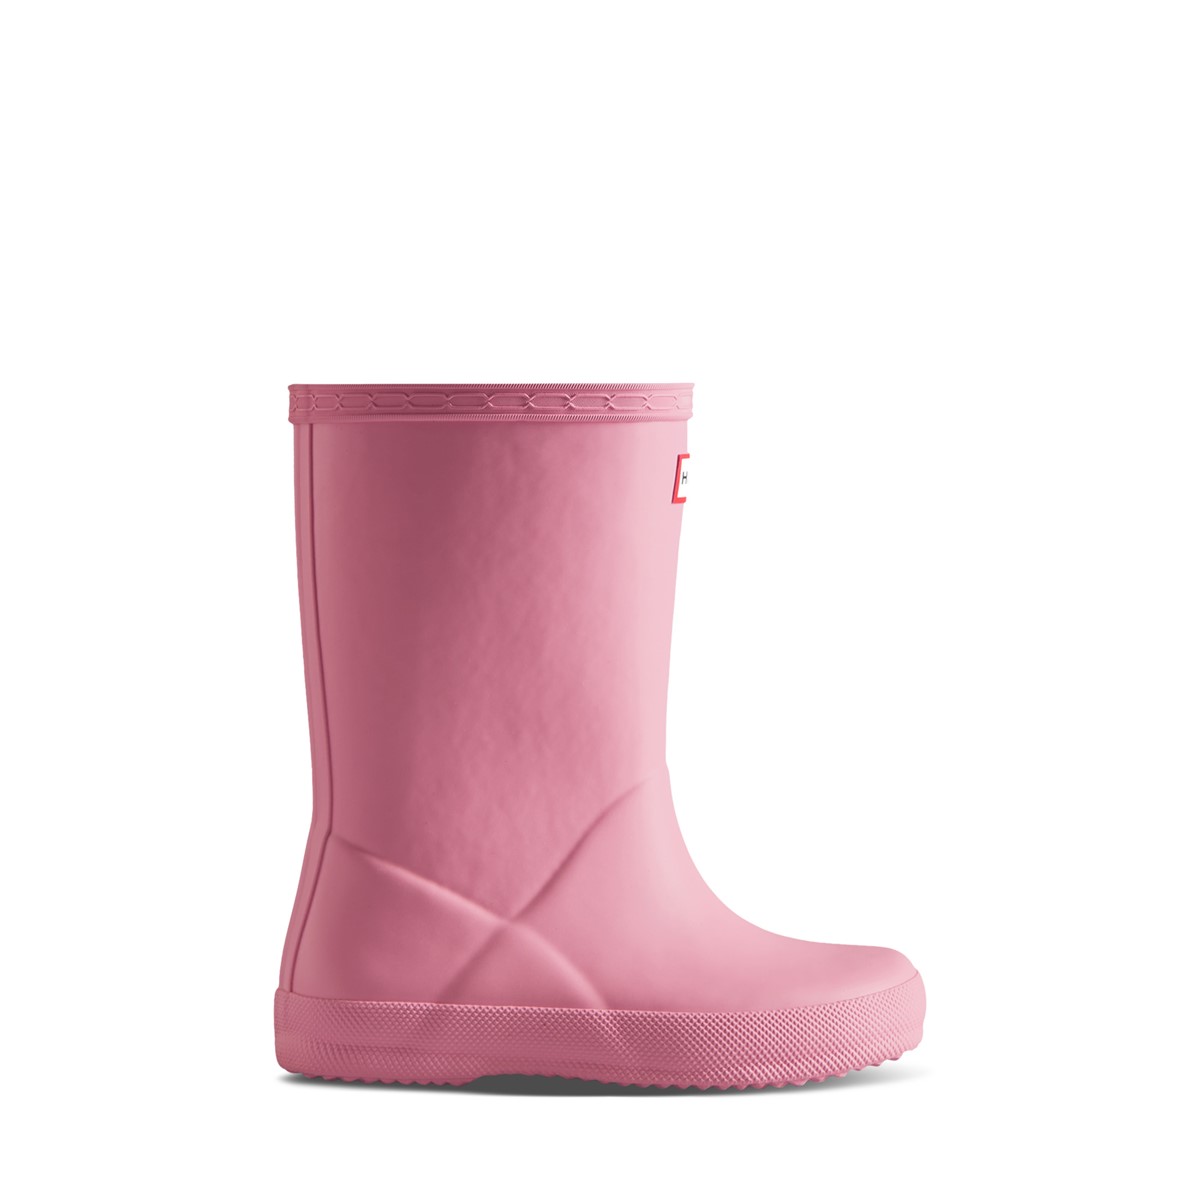 Toddler's First Classic Rain Boots in Pink